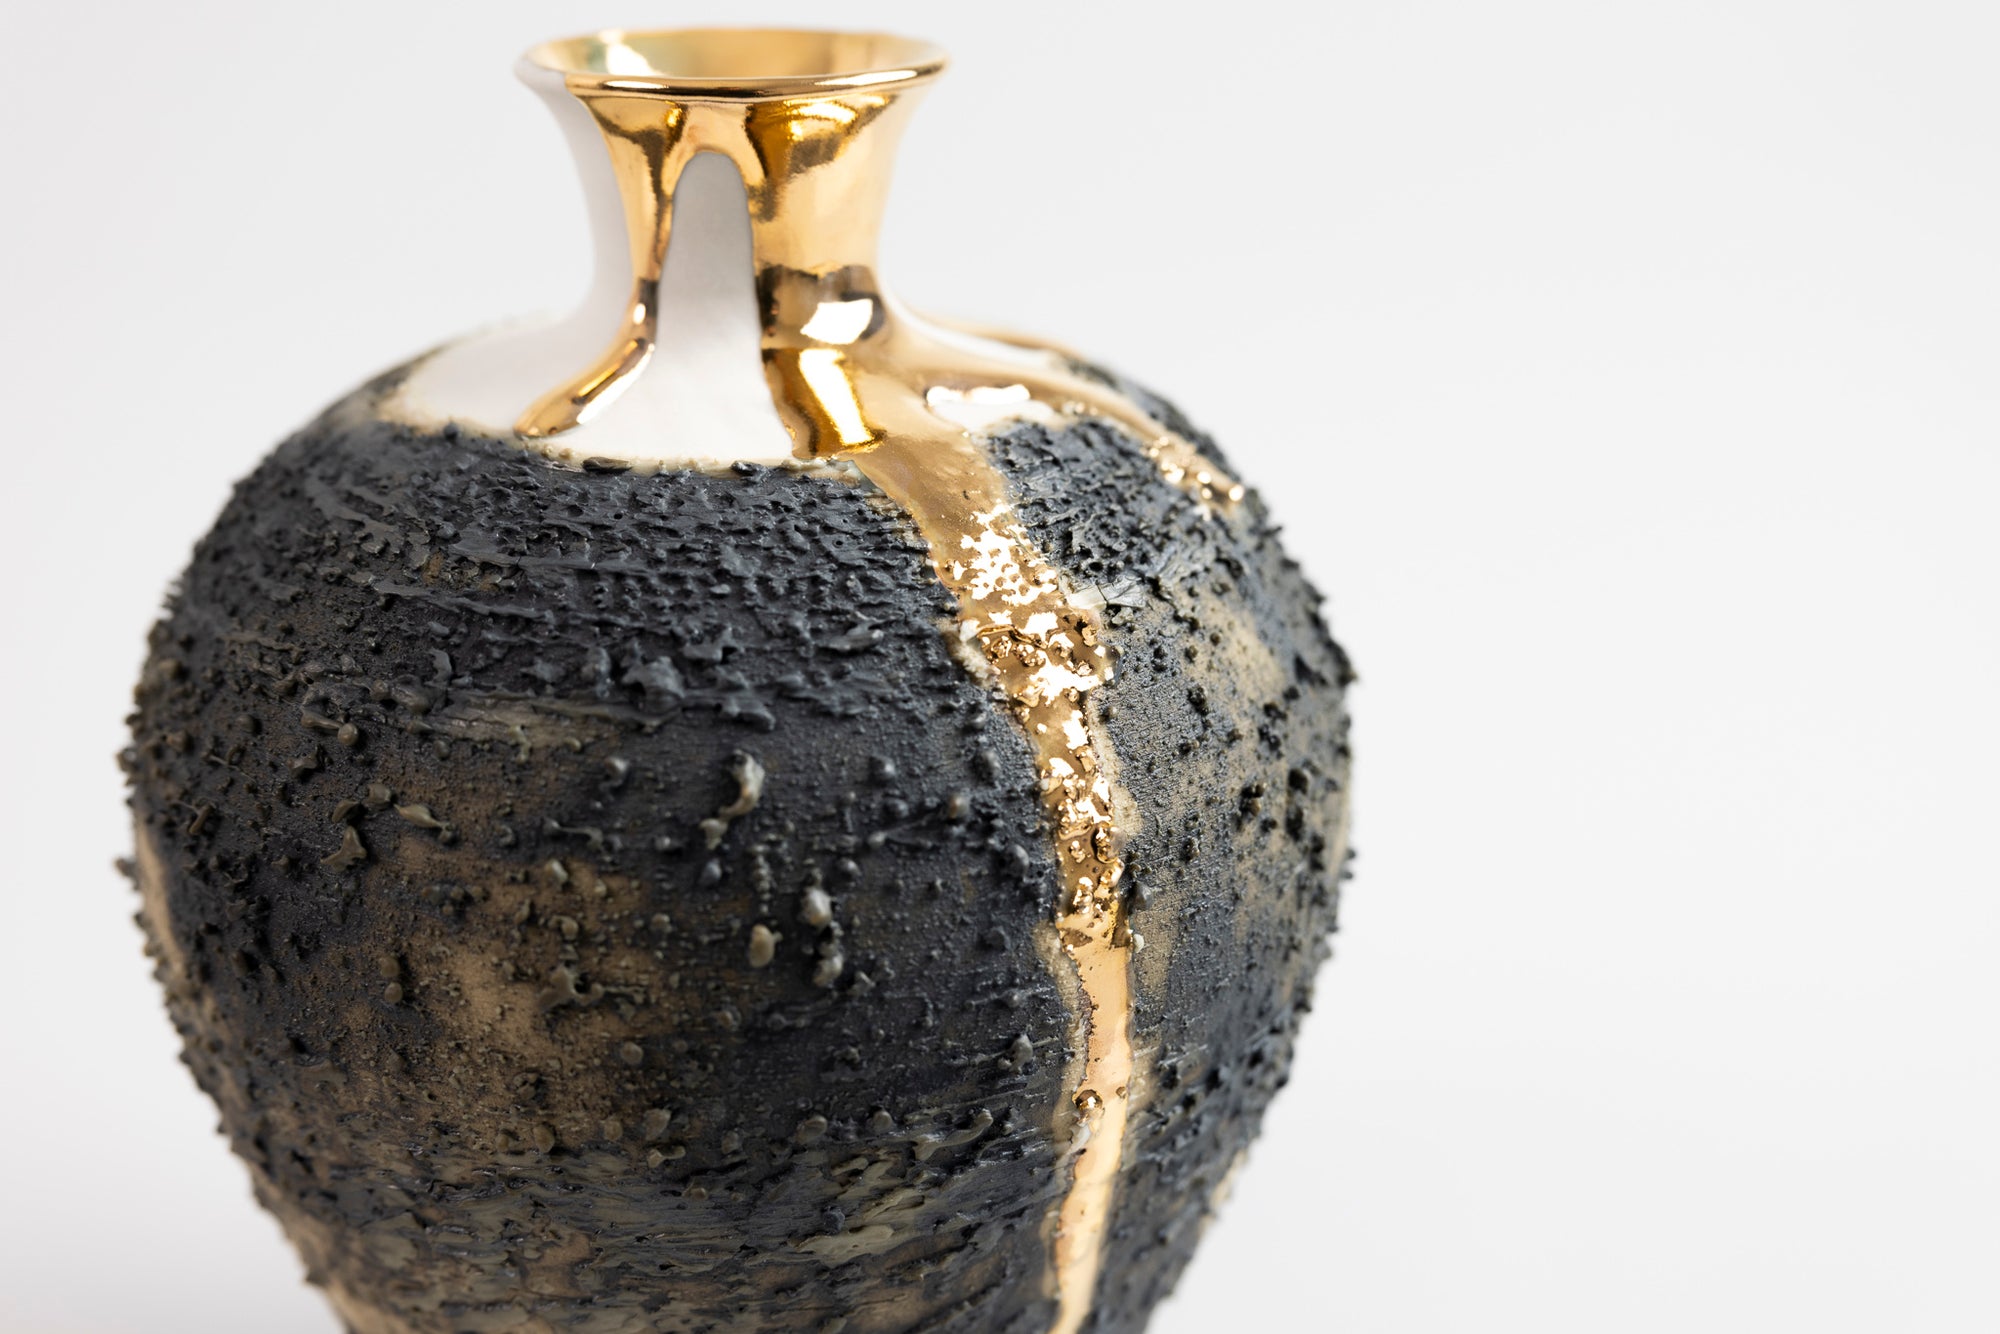 Textured vase with gold lustre, by Alex McCarthy, available at Padstow Gallery, Cornwall